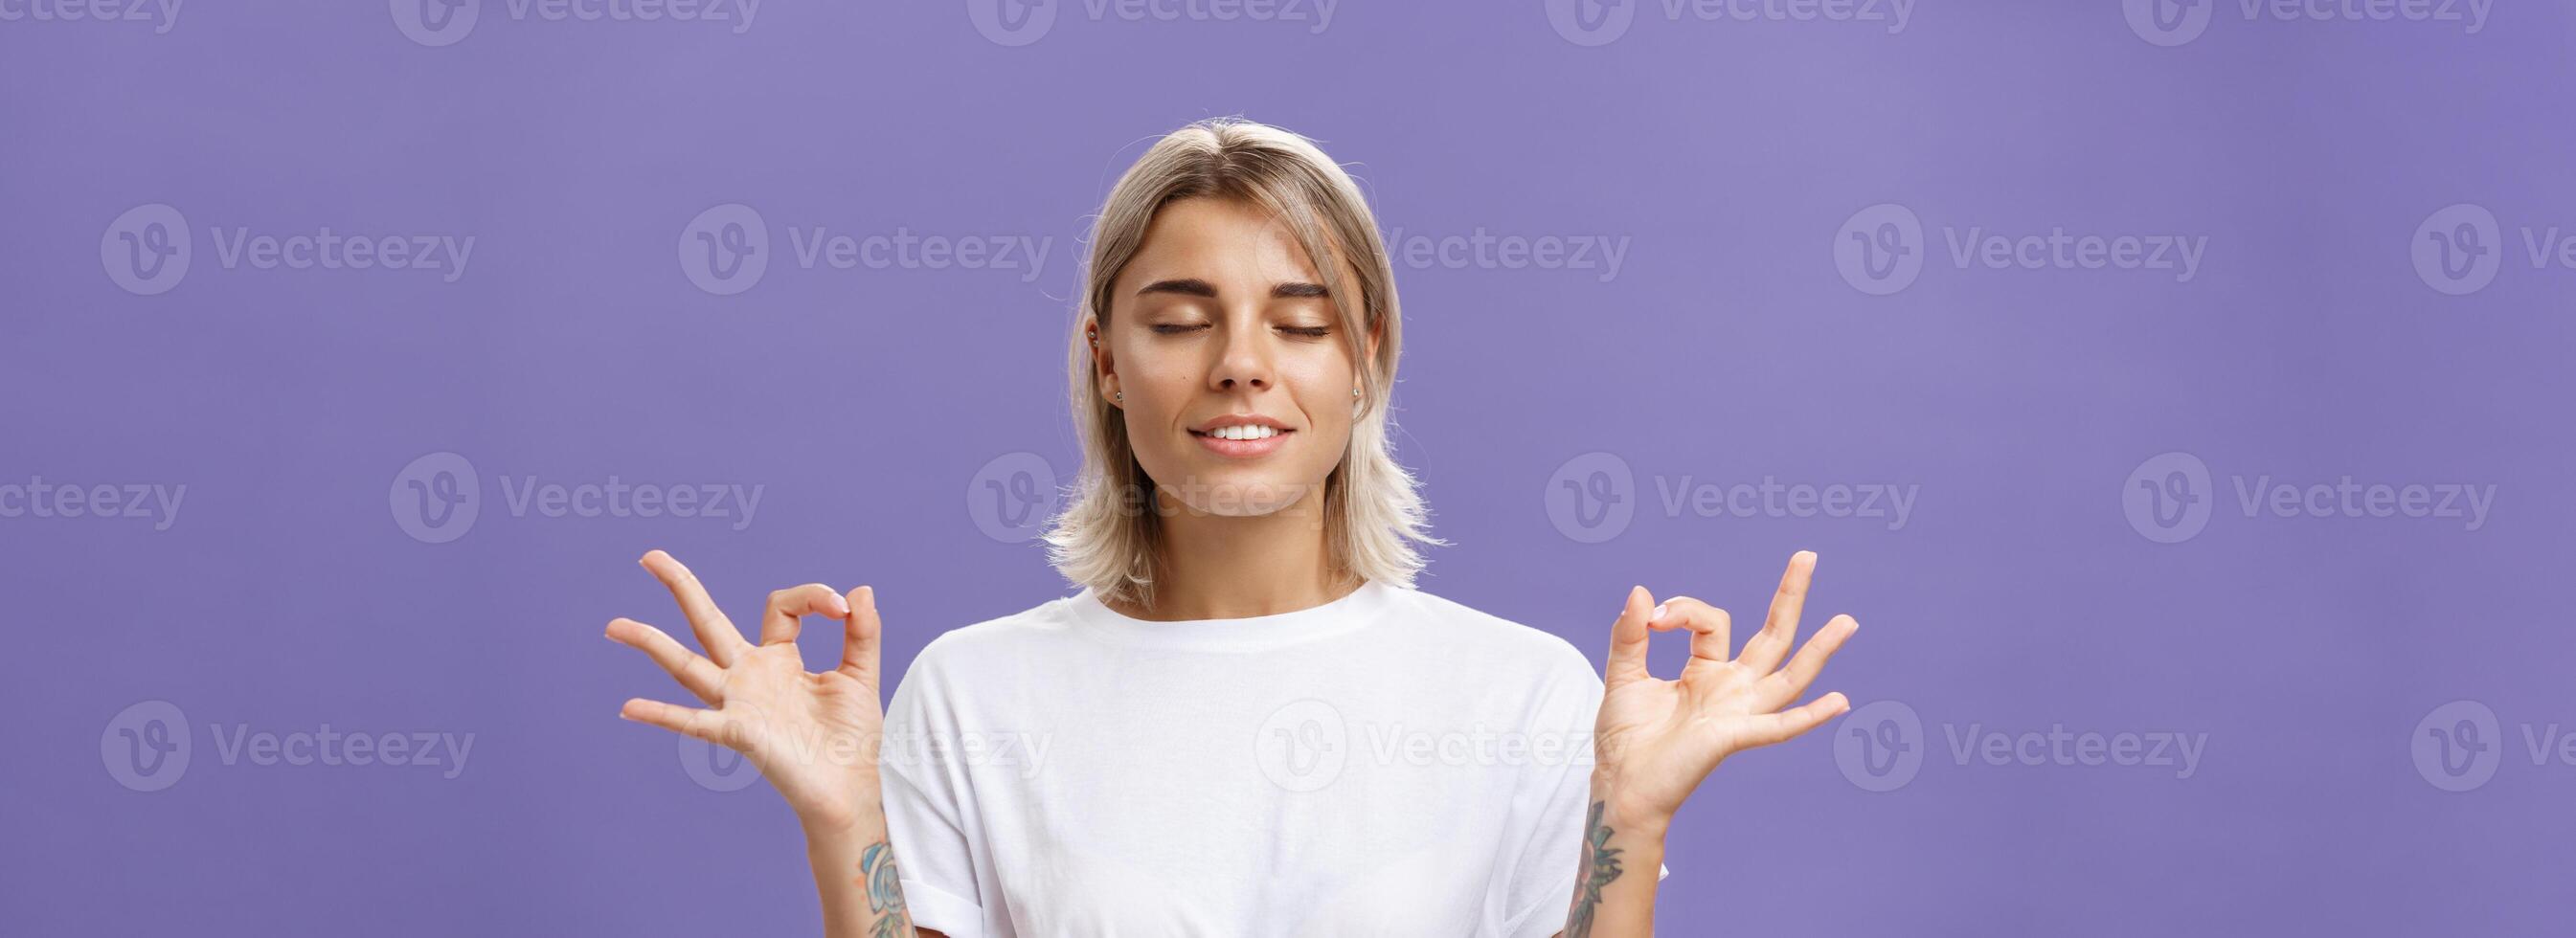 Peaceful calm good-looking female blonde in white t-shirt closing eyes smiling relieved and happy feeling satisfied with life standing in lotus pose with zen gesture over purple background photo